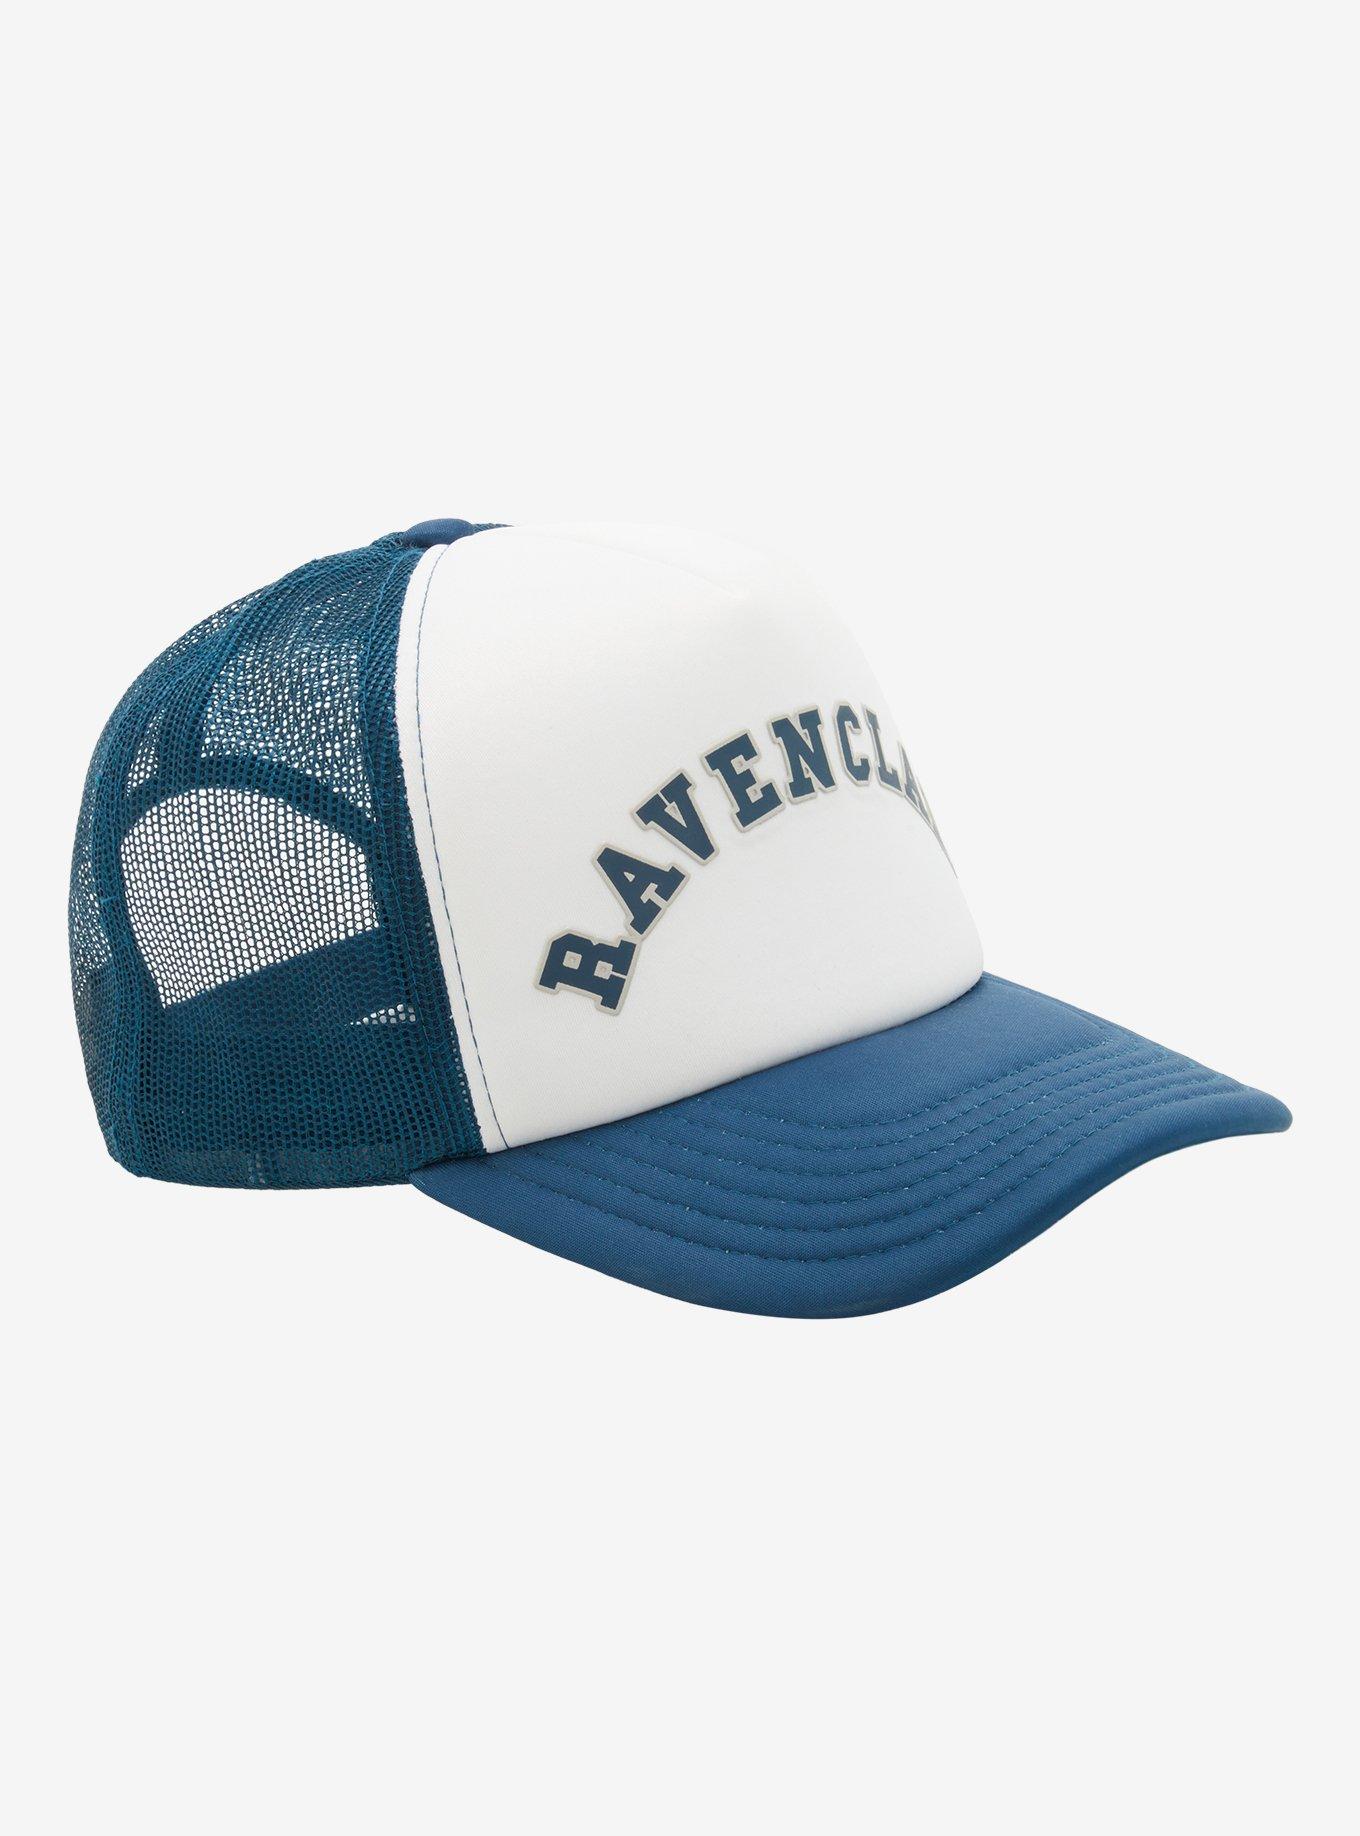 Harry BoxLunch | Trucker - Potter Ravenclaw Exclusive Collegiate Cap BoxLunch